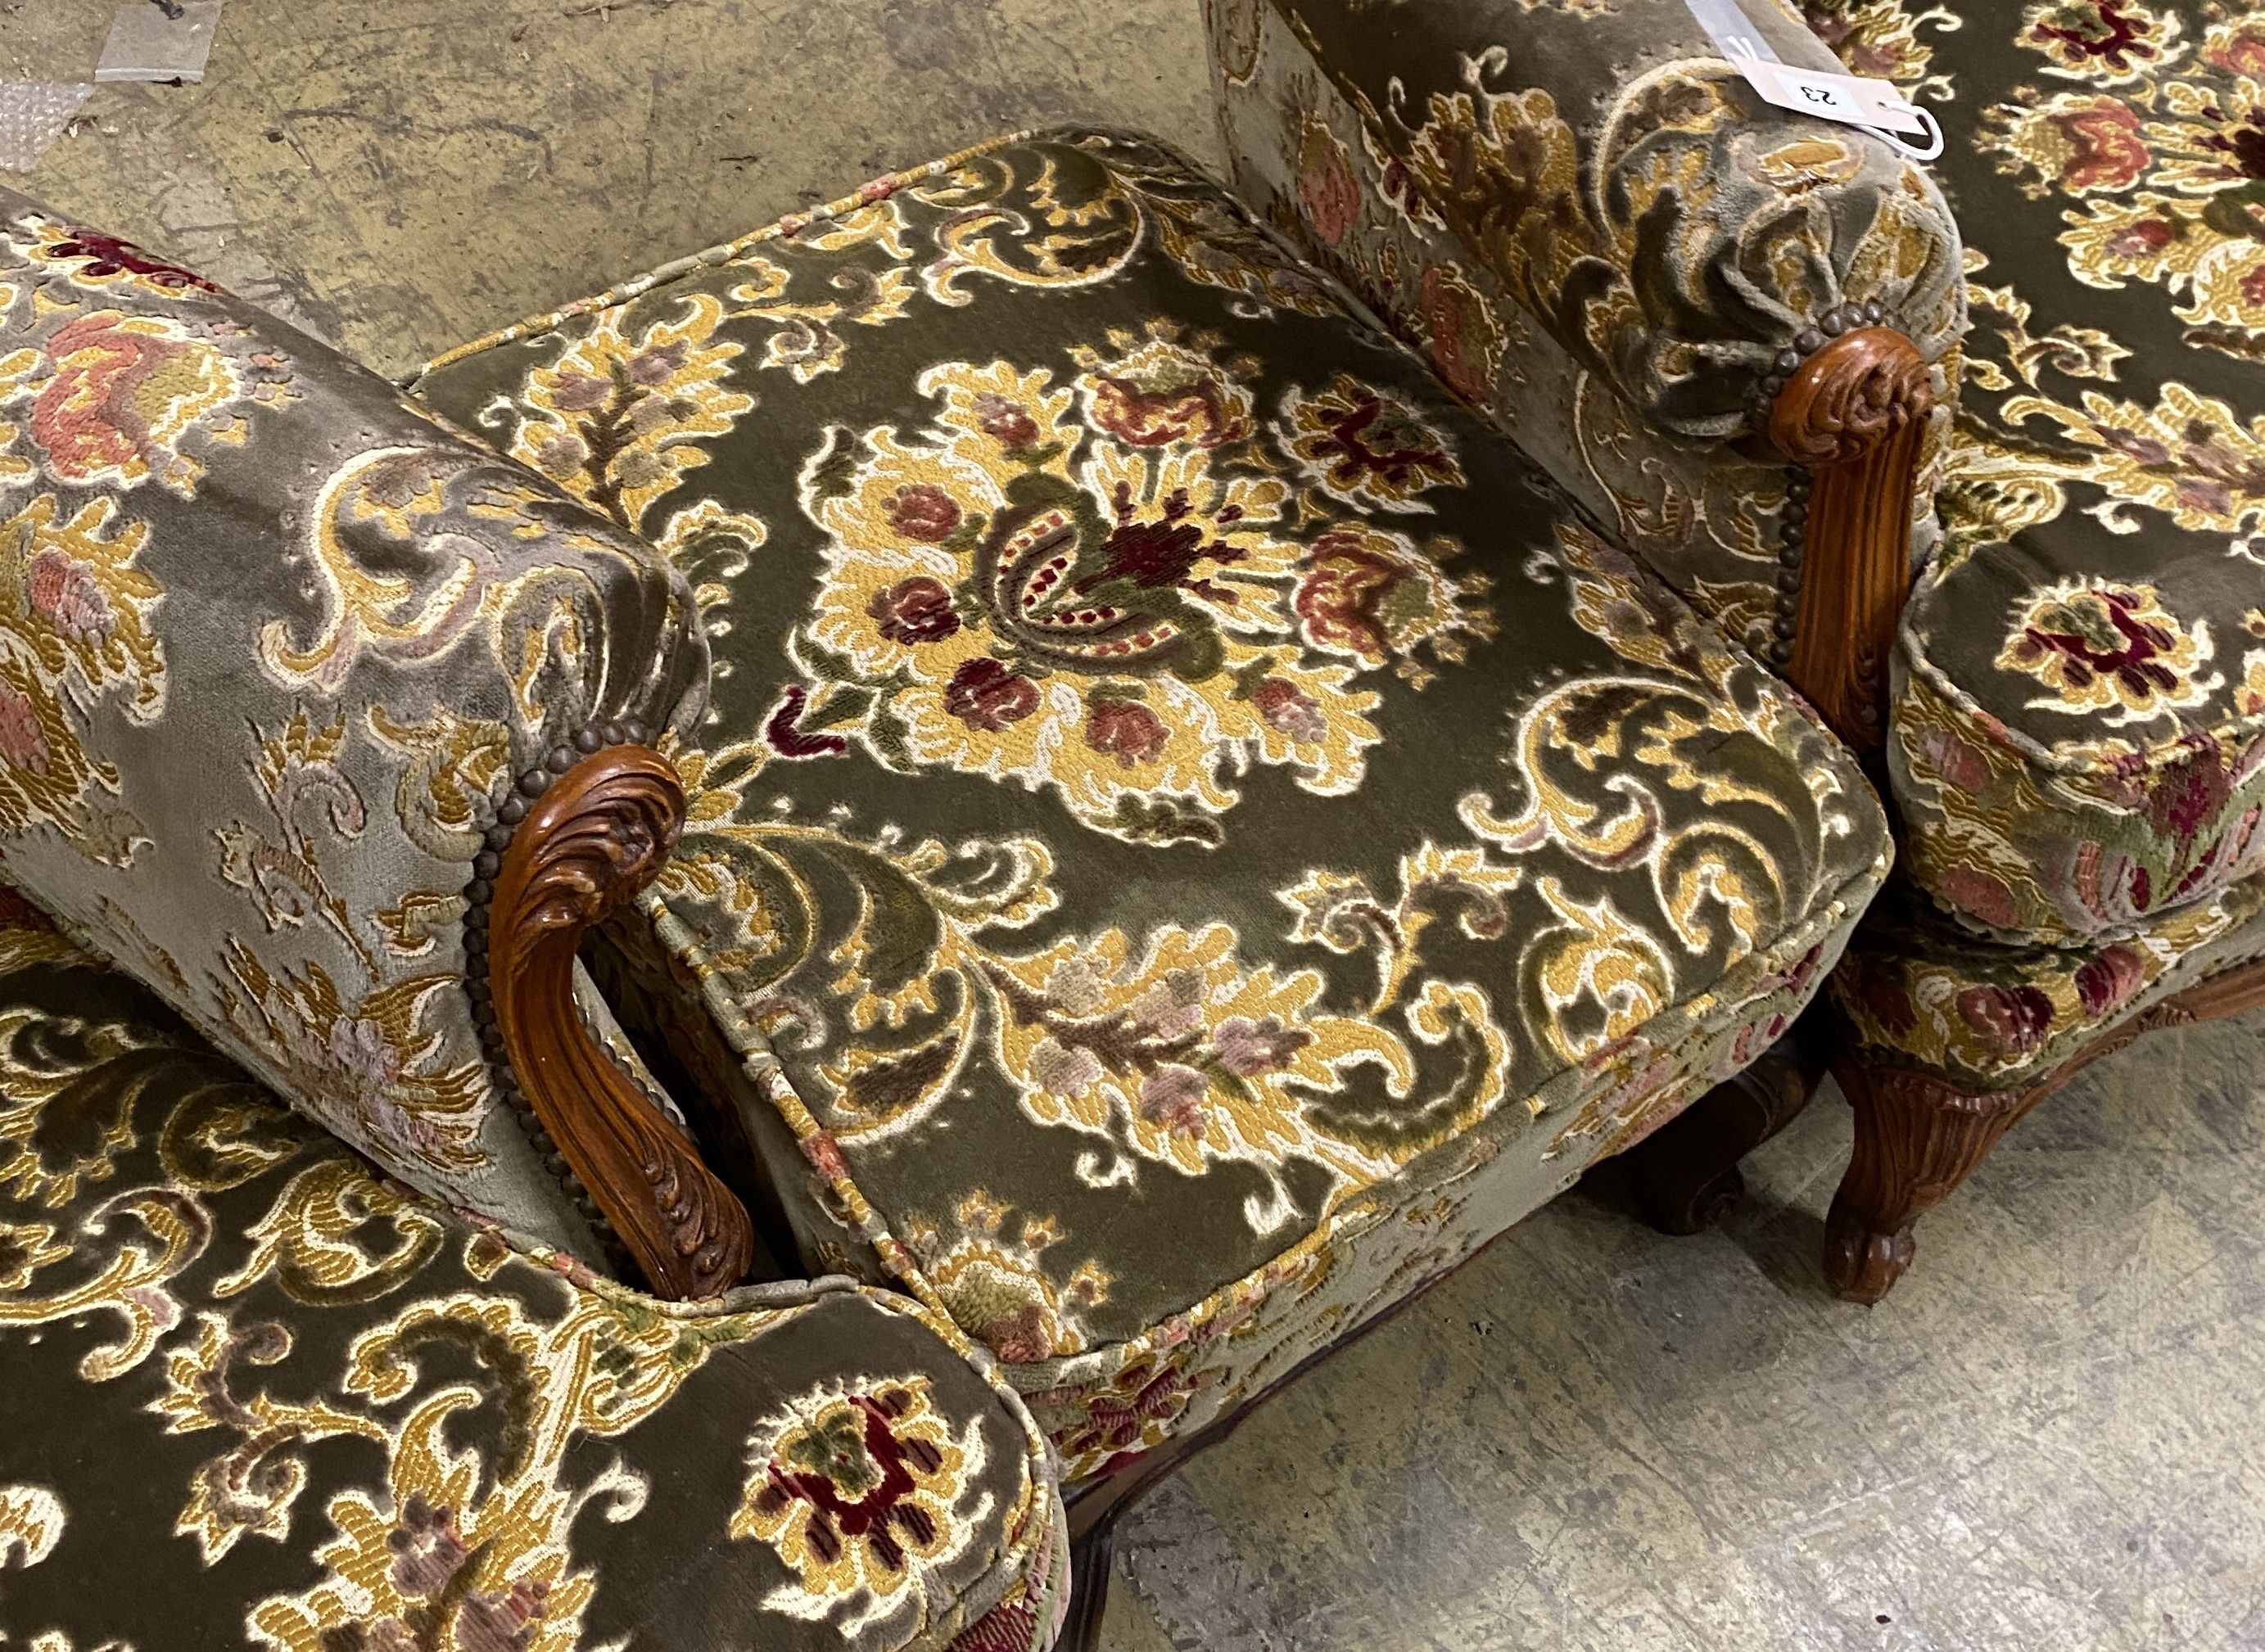 A pair of Louis XVI style armchairs, width 90cm, depth 86cm, height 82cm and a stool